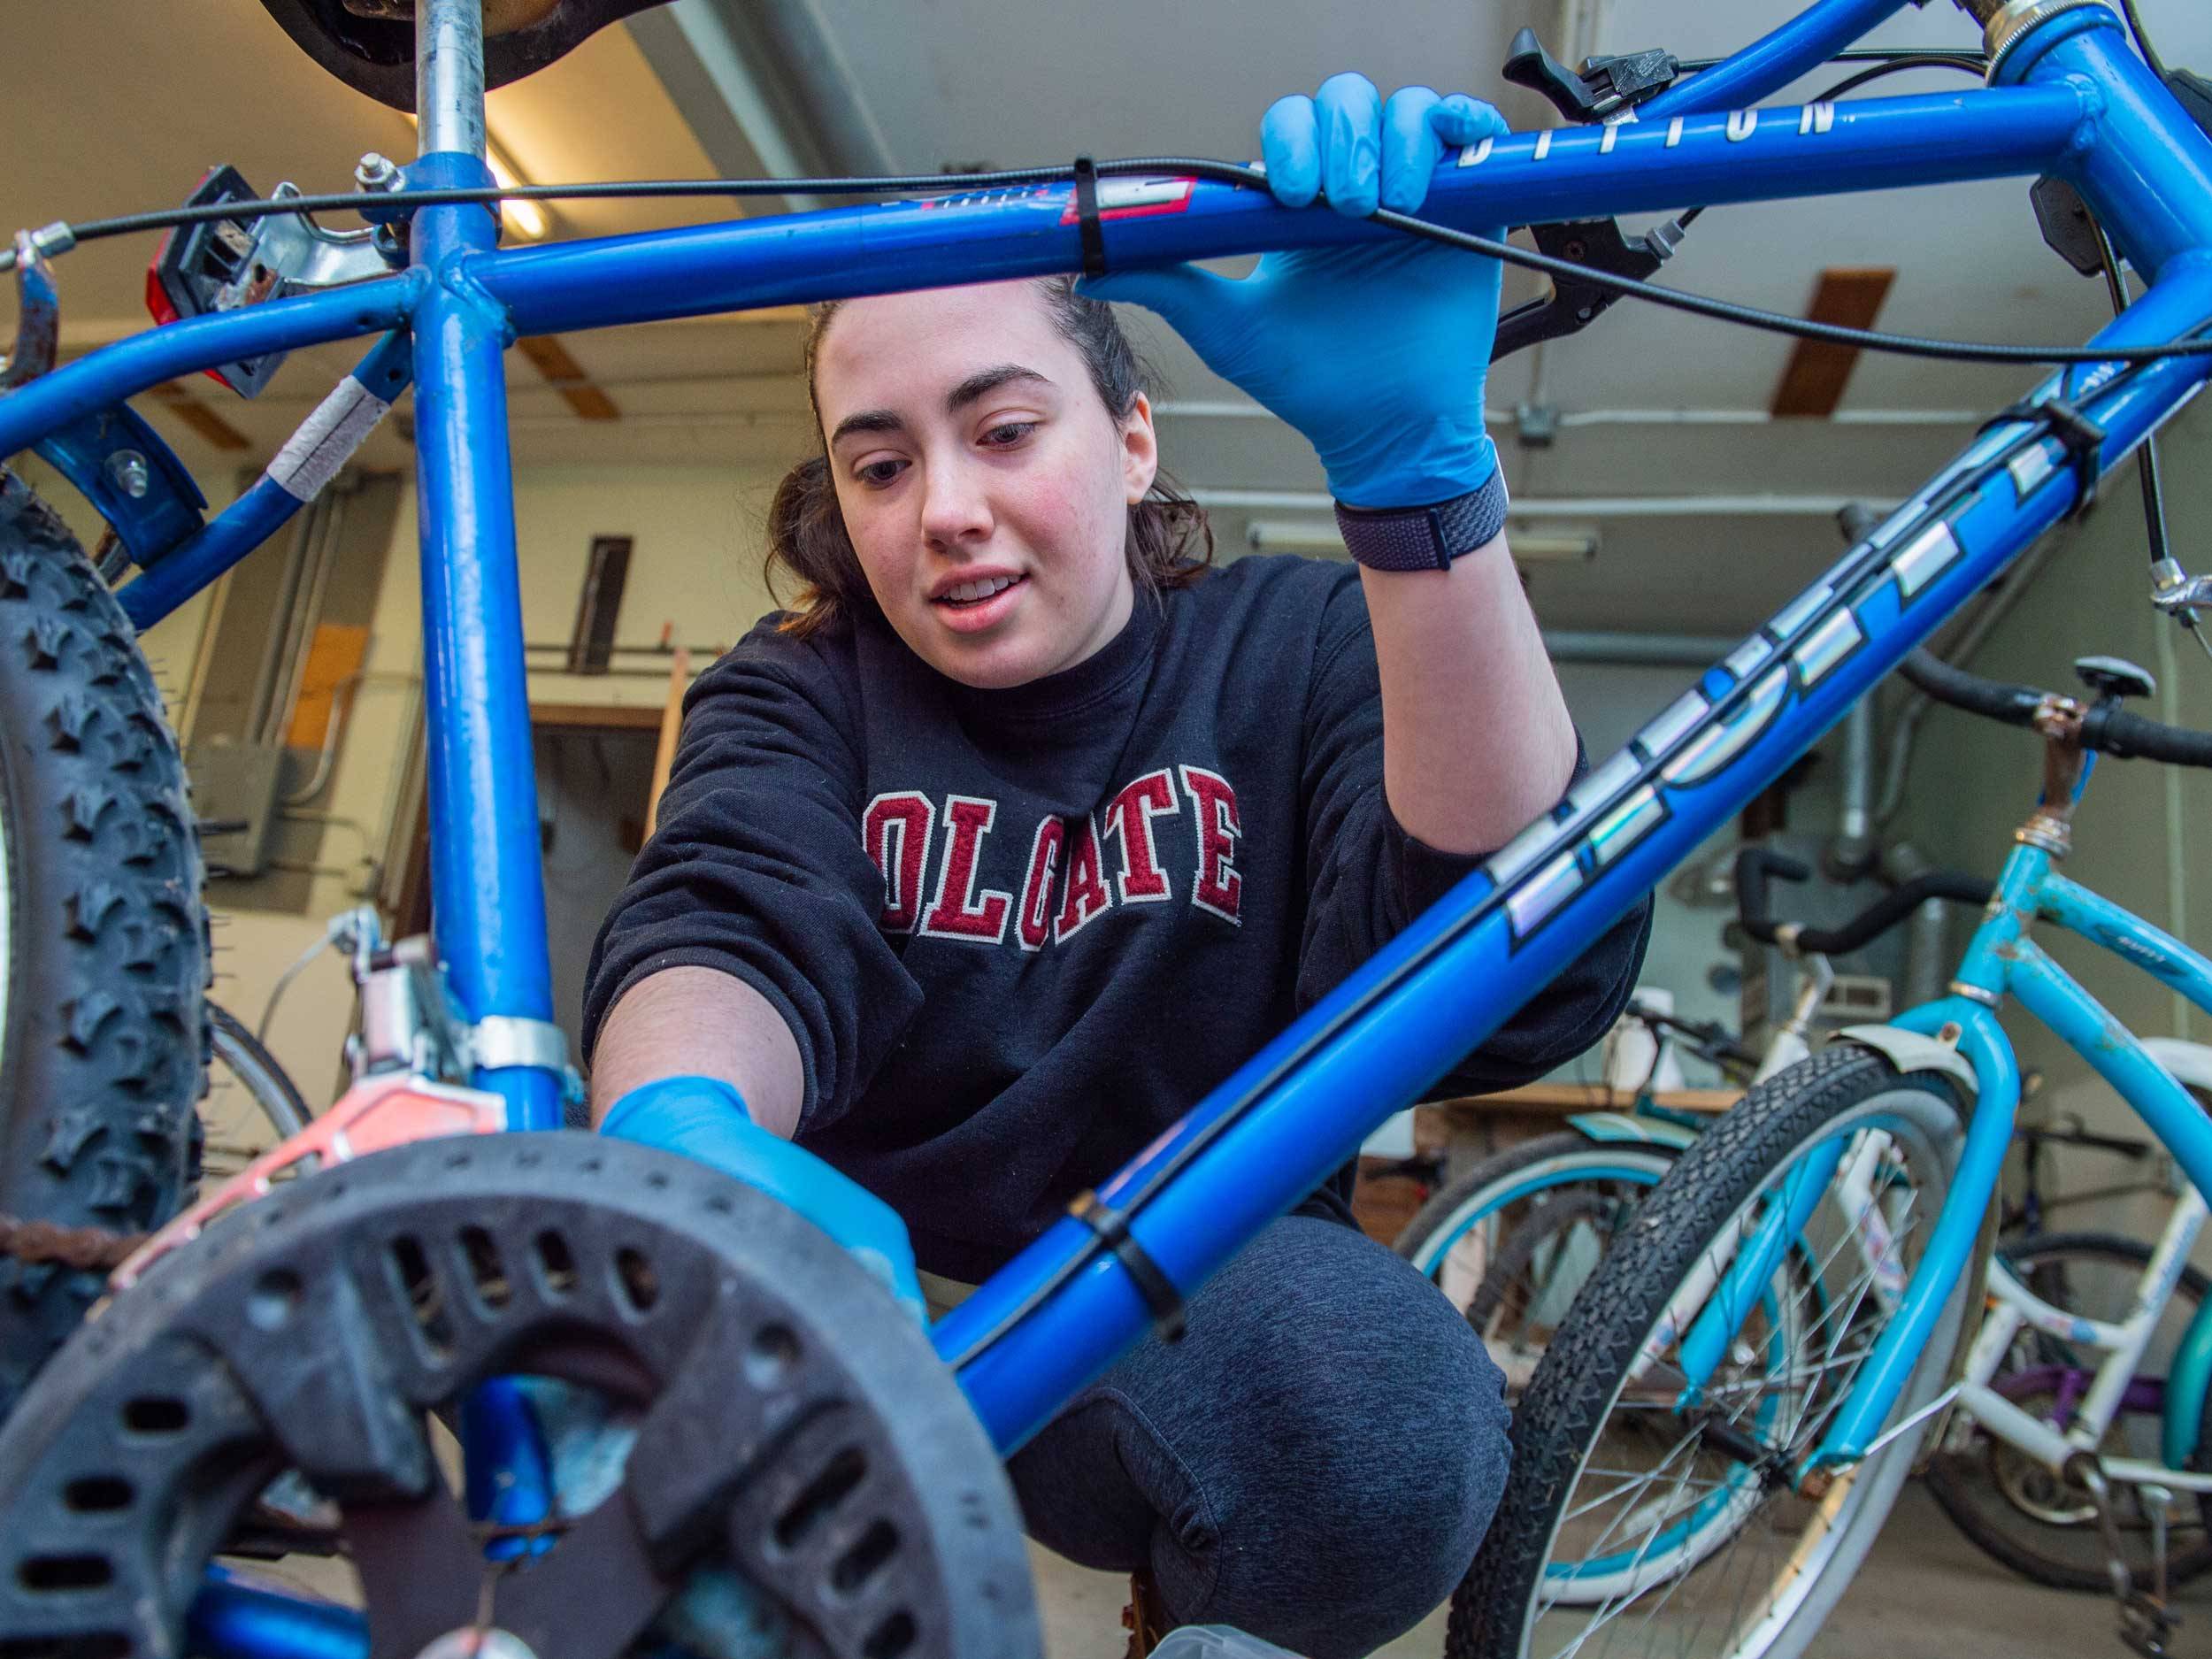 2. Colgate University students work on cleaning donated bicycles at Community Bikes